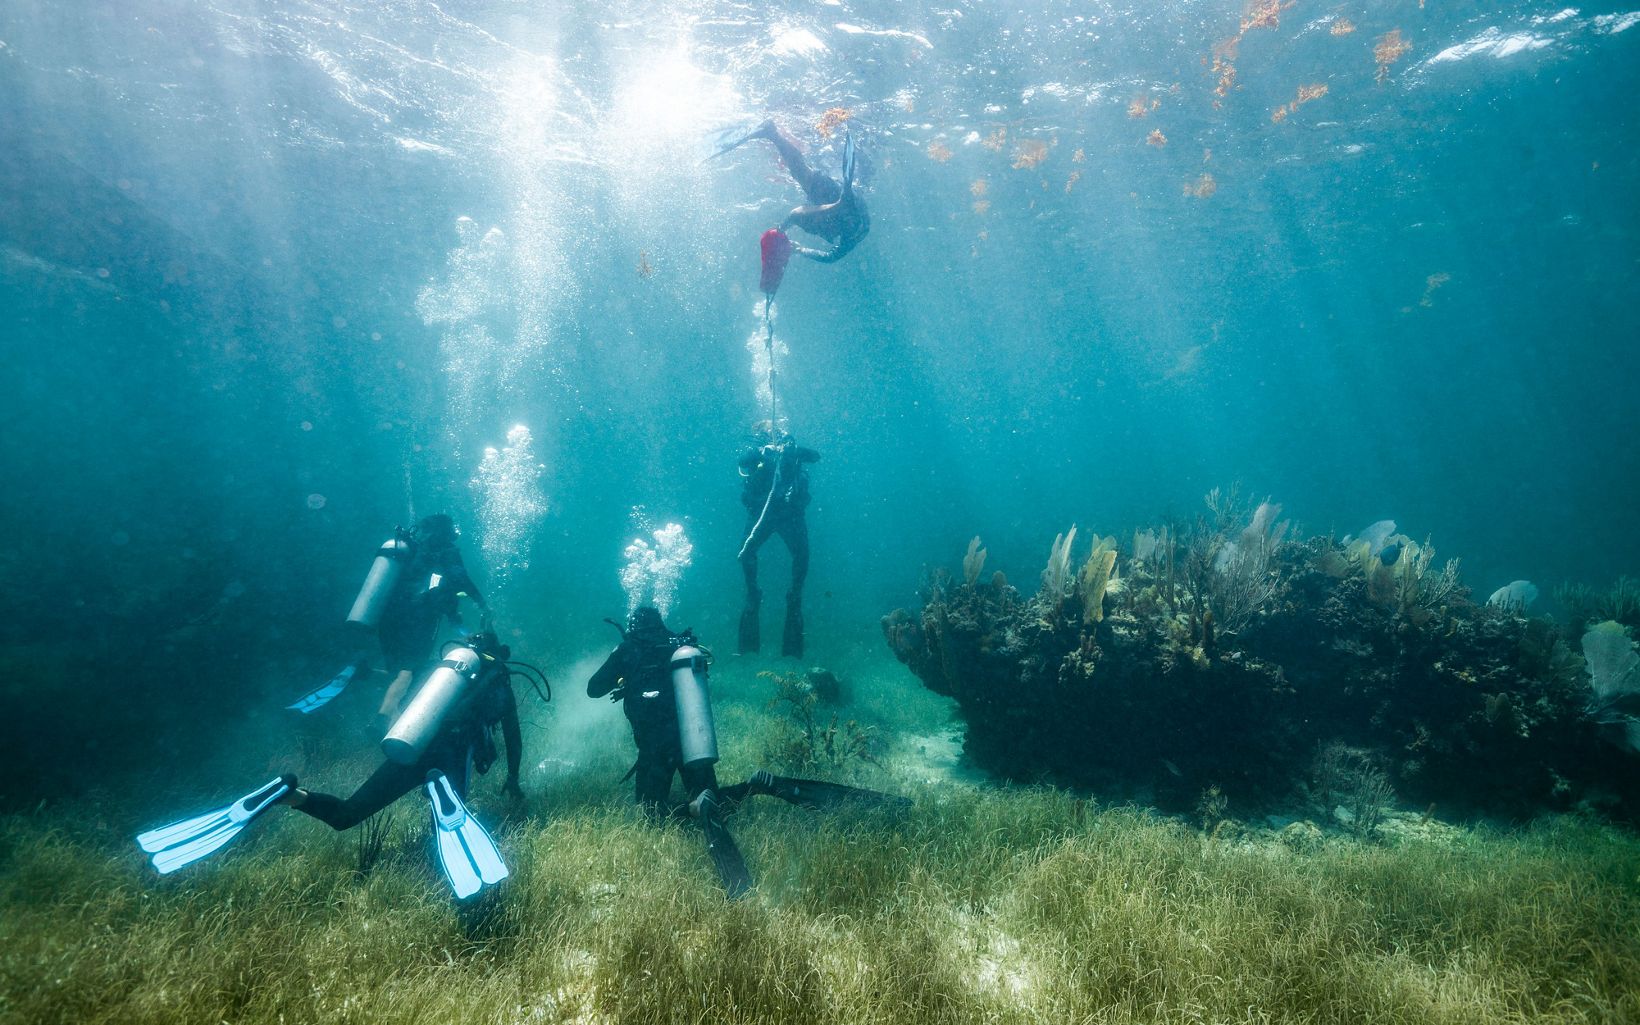 Reef monitor training During the second day of coral reef rapid-response training for natural disasters, brigade members practice with life bags, and also practice coral transplanting, cementing, and drilling. Brigade members work together to complete activities. In the Mesoamerican Barrier Reef  at Puerto Morelos Reef National Park.  Puerto Morelos, Mexico. June 2018.        © Jennifer Adler